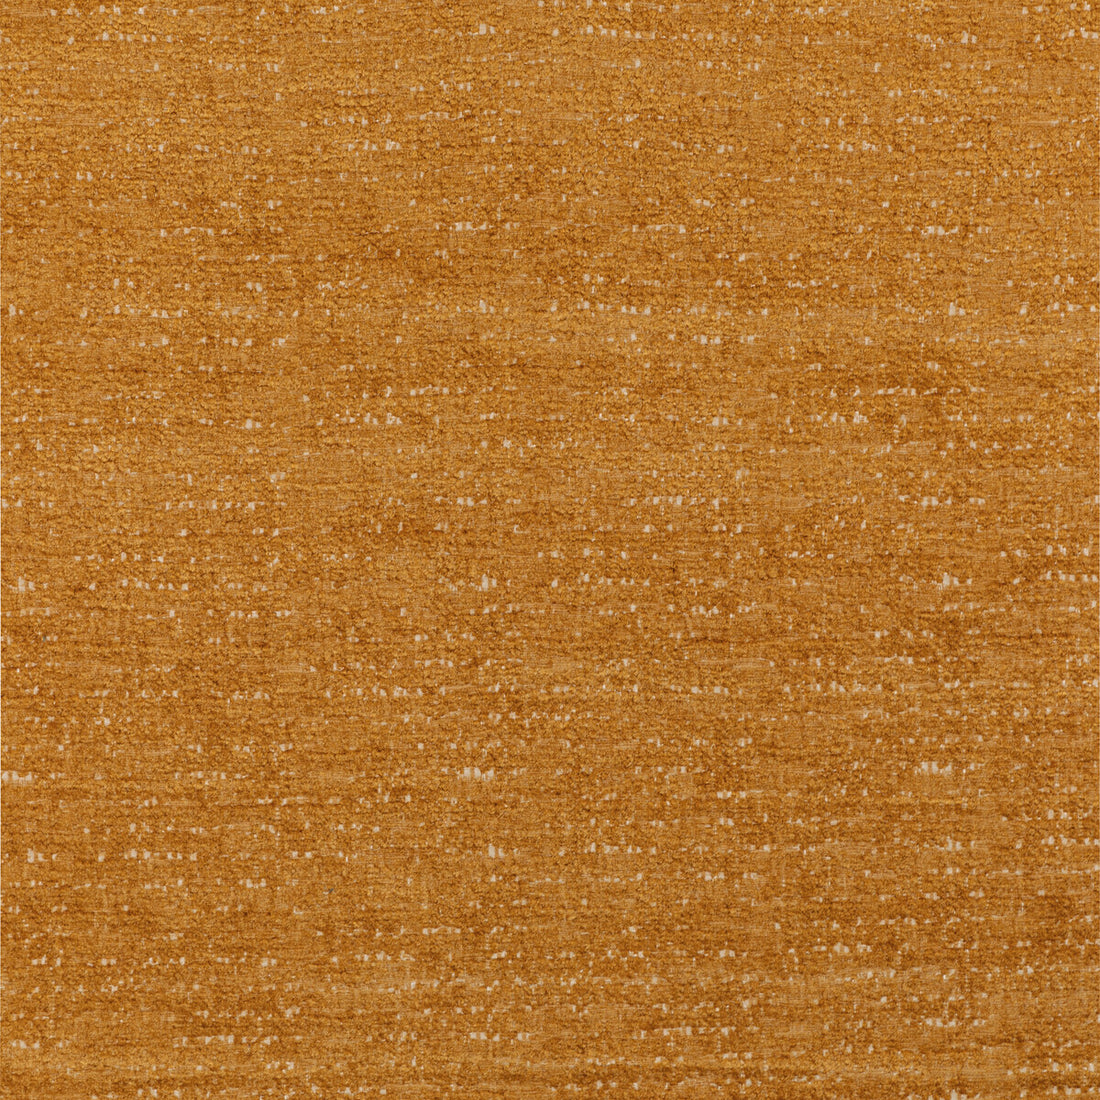 Plume fabric in terracotta color - pattern GWF-3761.12.0 - by Lee Jofa Modern in the Kelly Wearstler VI collection